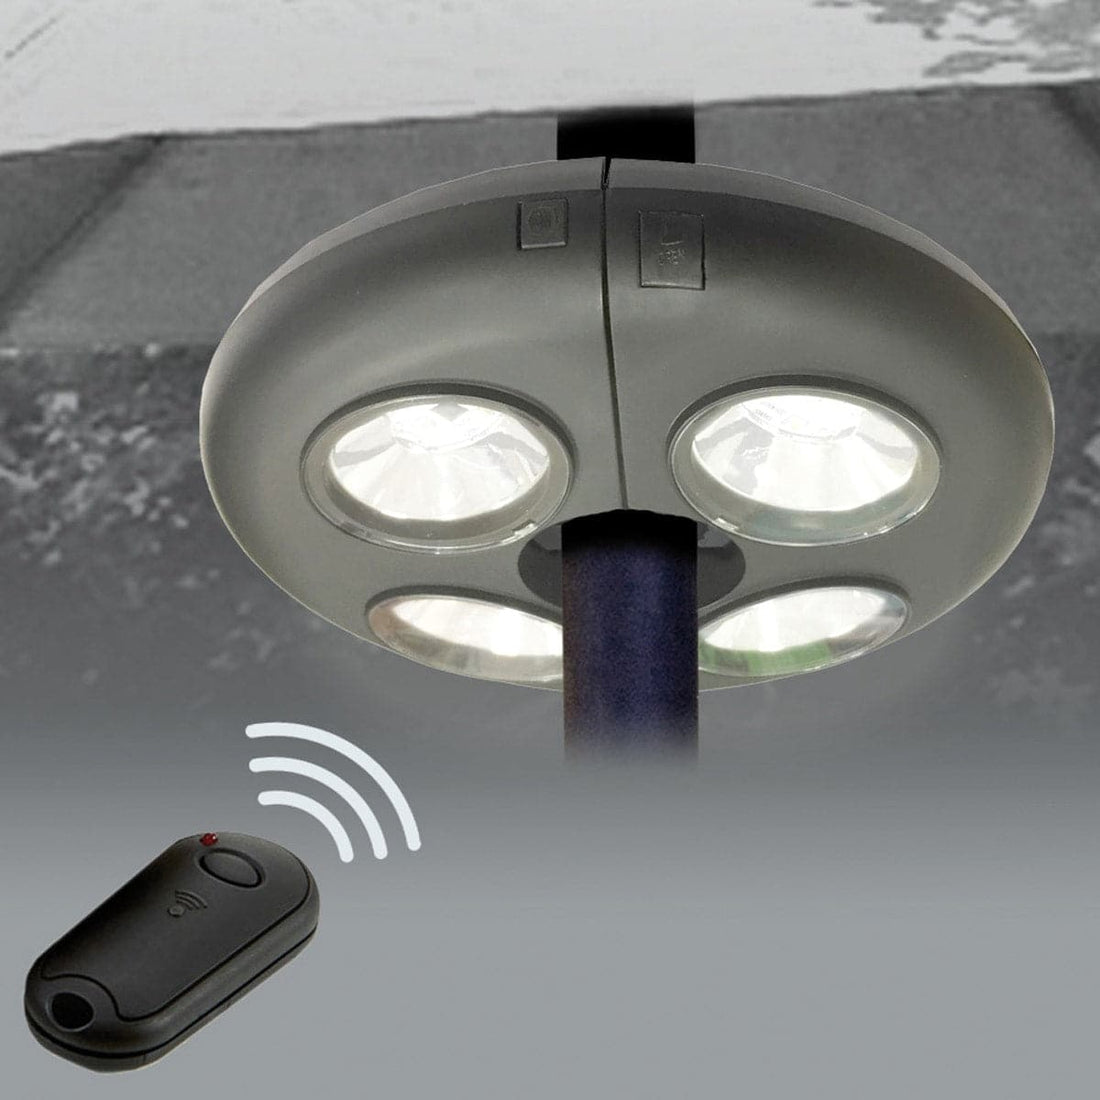 UFO LED PARASOL LIGHT 2,2W COLD LIGHT BATTERY OPERATED WITH REMOTE CONTROL - best price from Maltashopper.com BR420005487